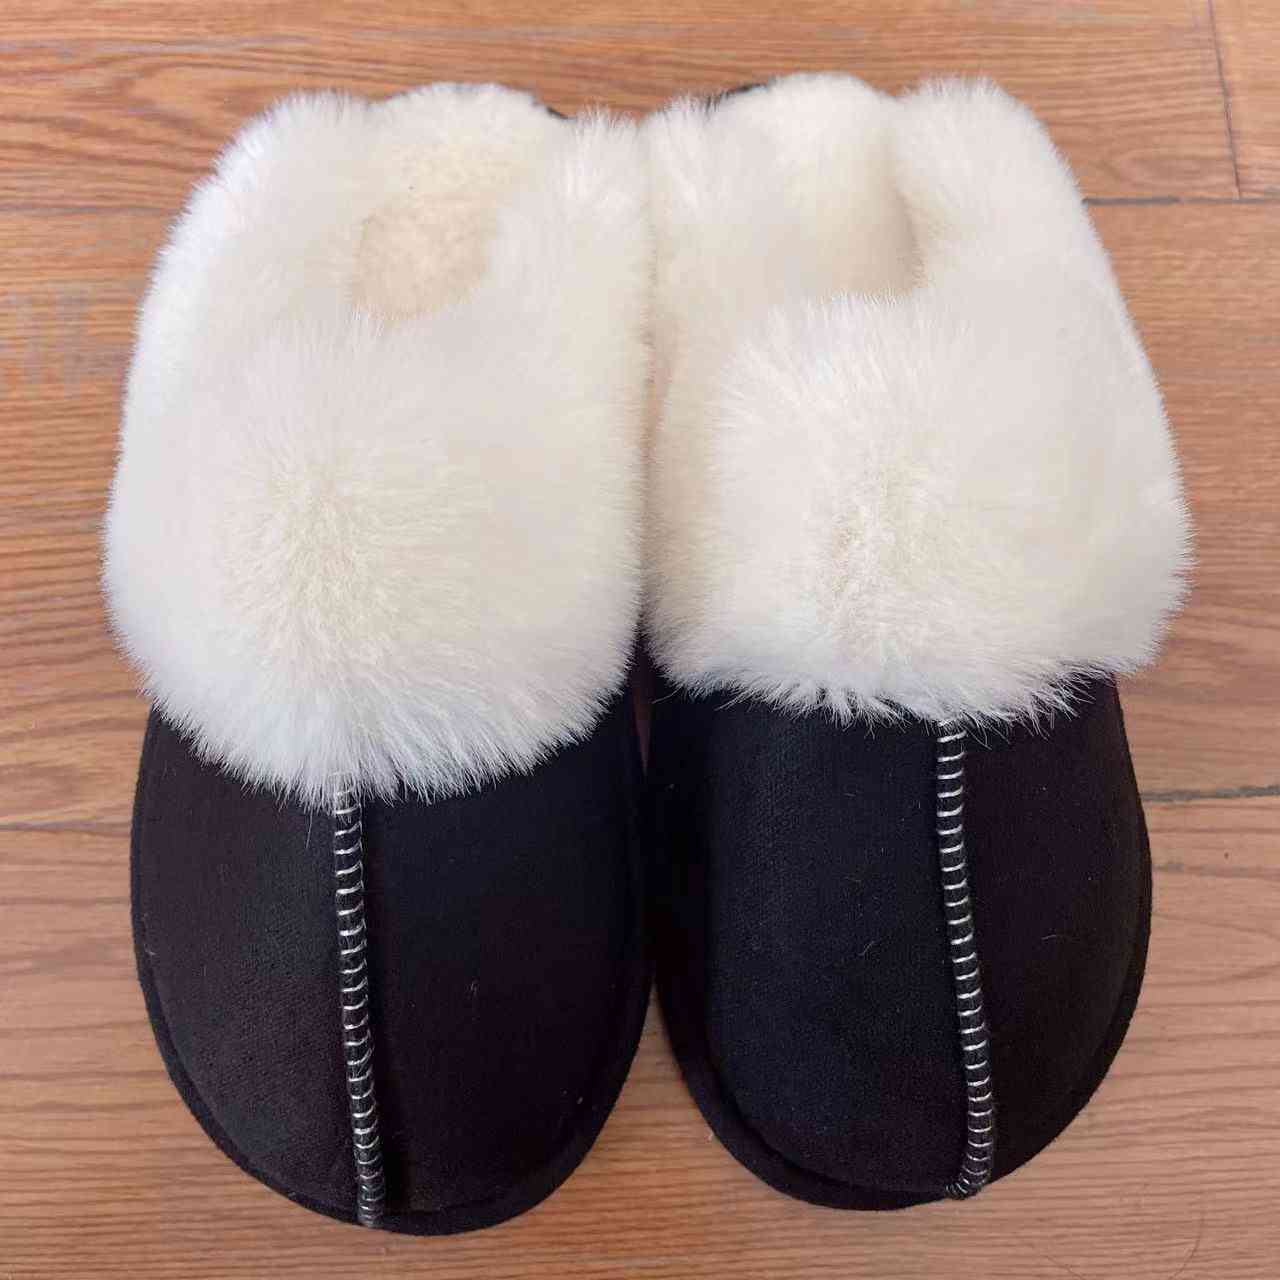 A pair of comfortable Trendsi vegan suede center seam slippers on a wooden floor.